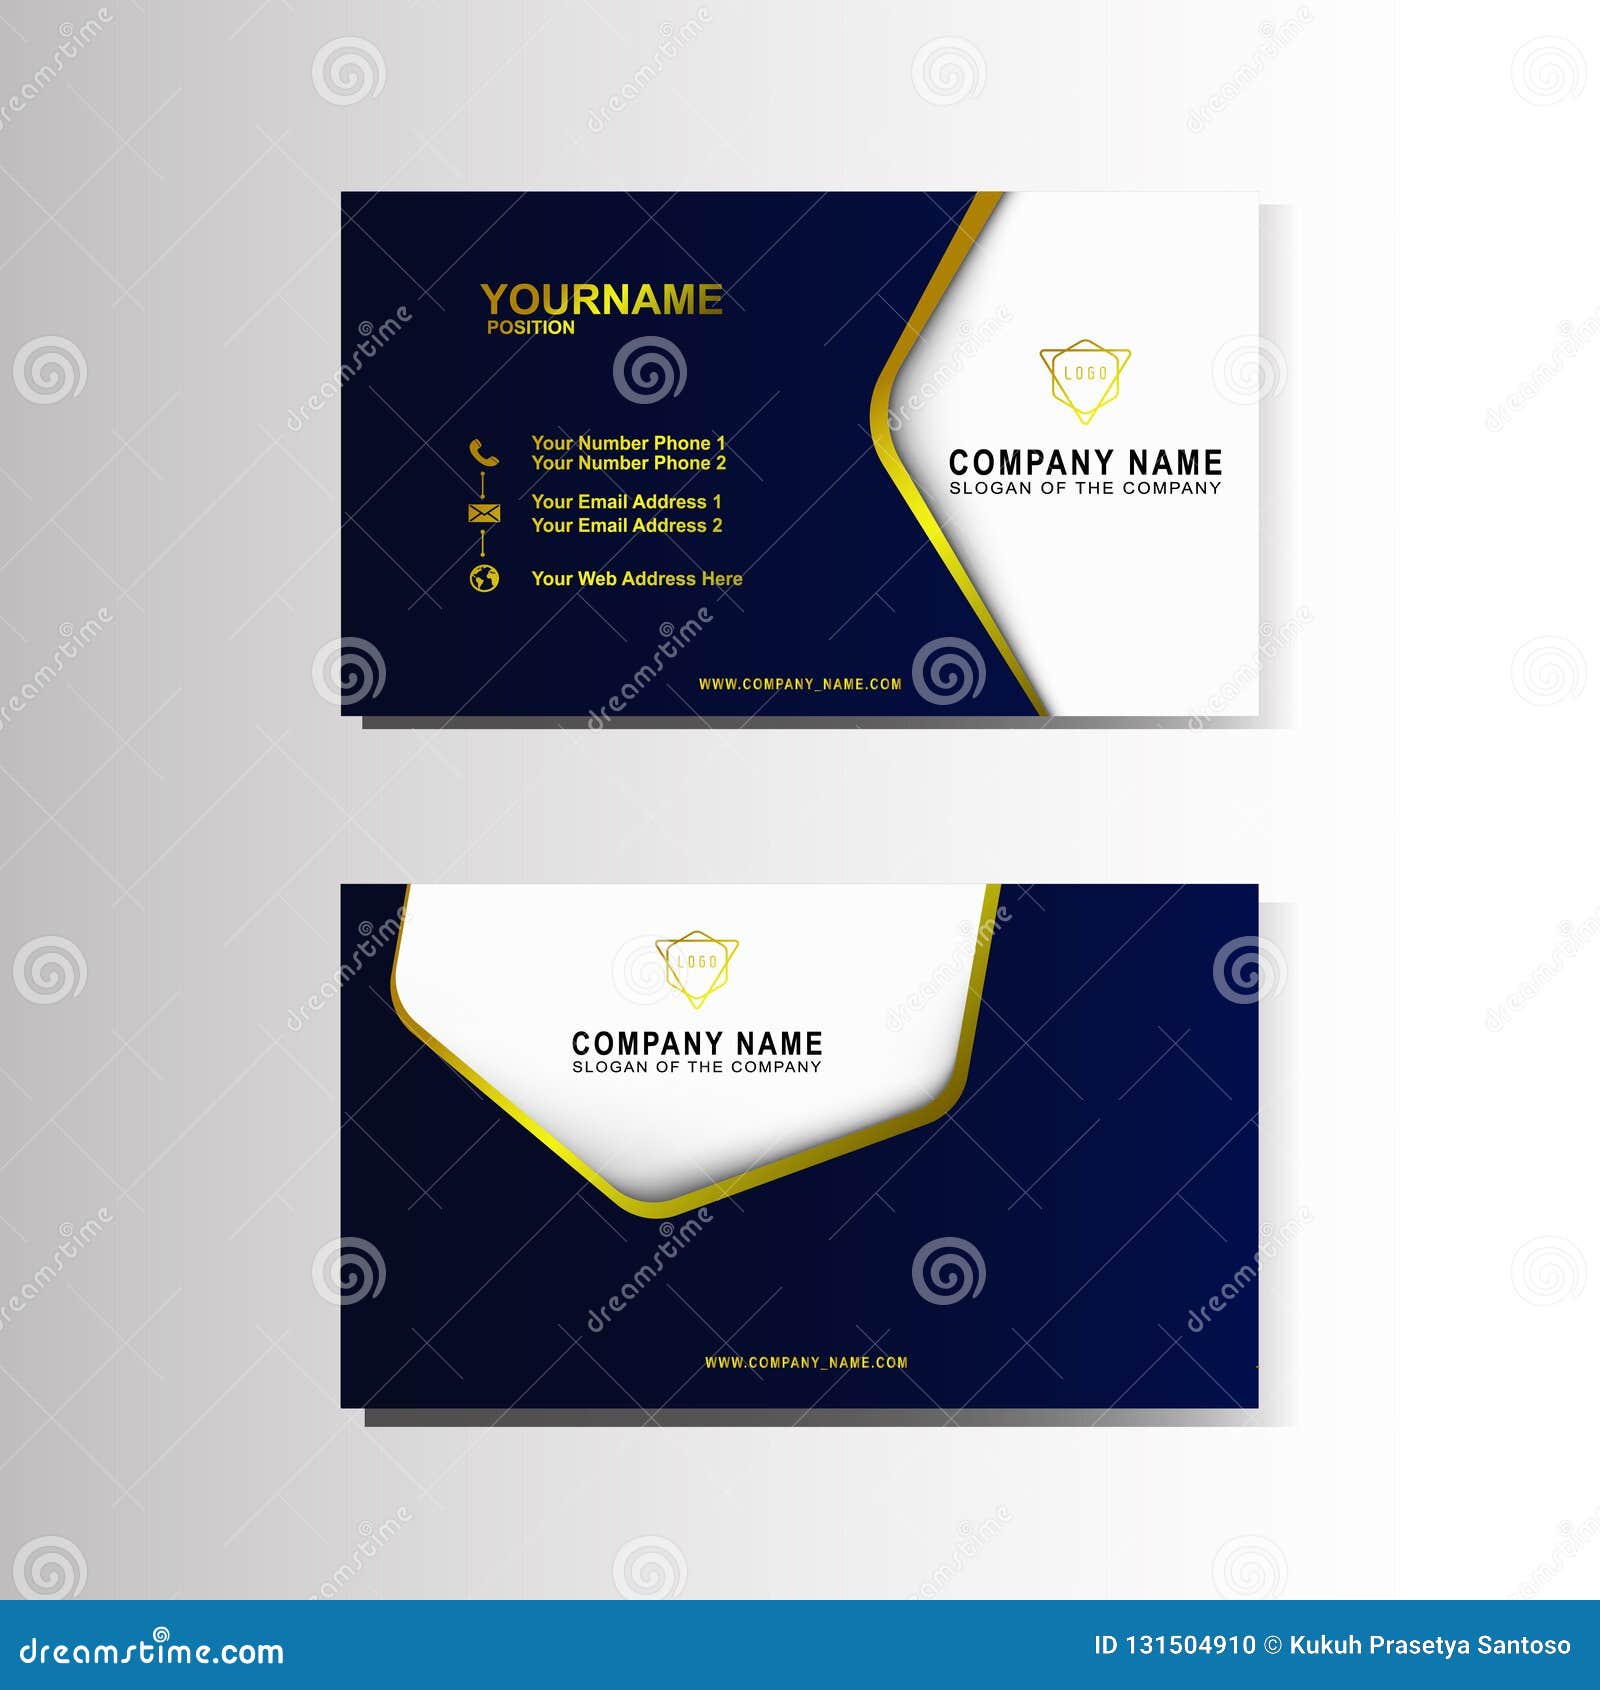 Luxury Business Card Design Templates for Personal and Company In Free Personal Business Card Templates